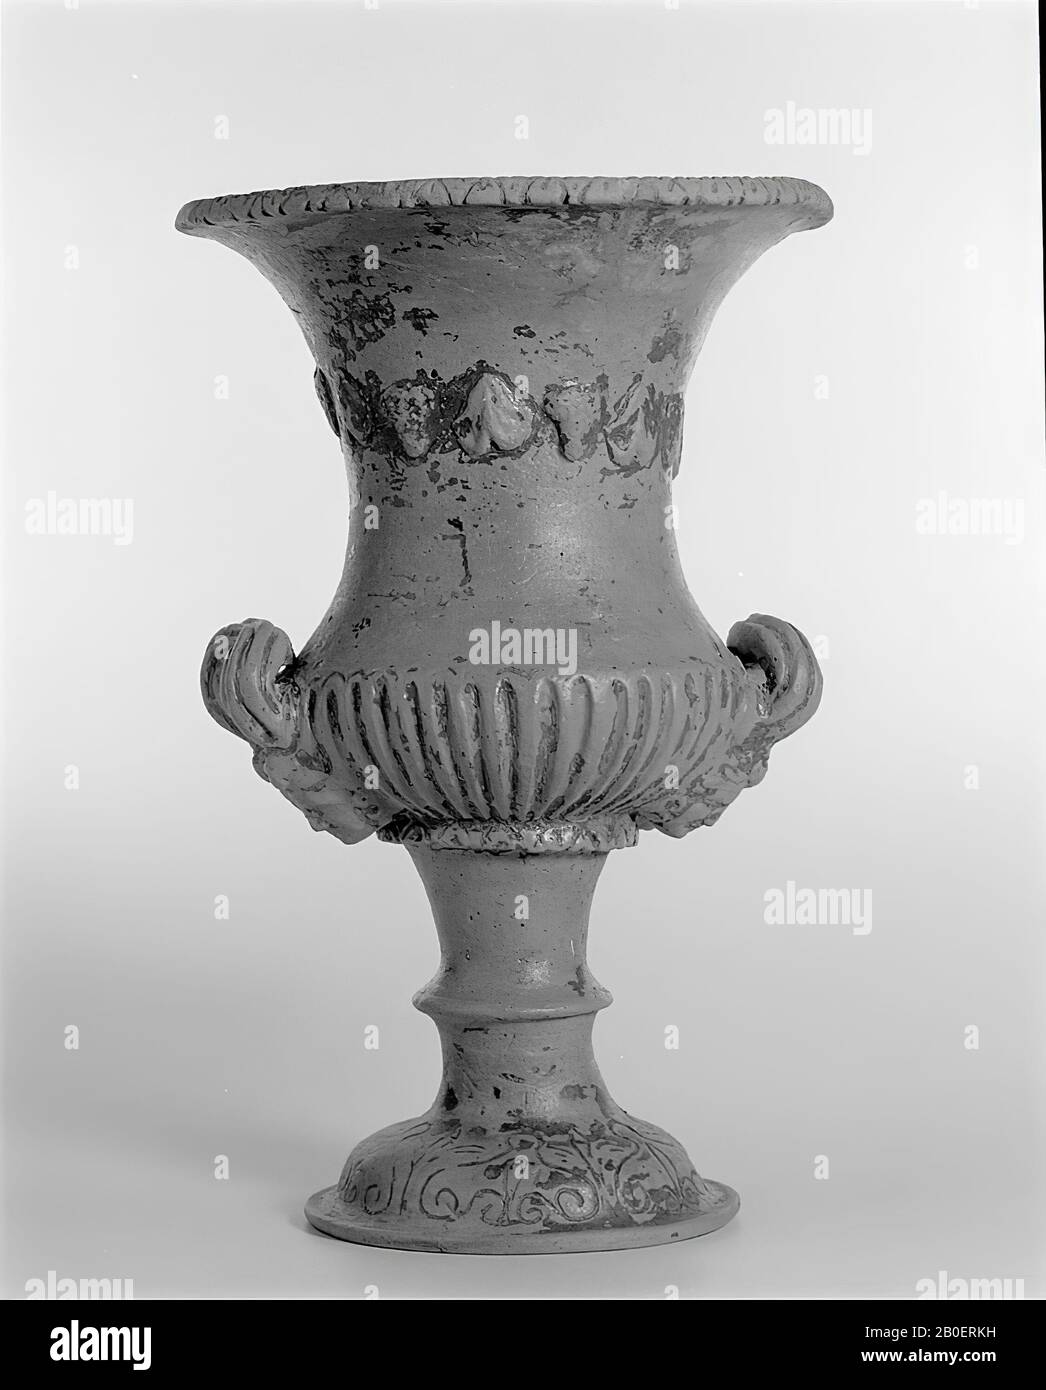 Etruscan? Yelloe slip true calyx crater. Reliefdecoration of leaves and grapes. Etruscan yellow slip true chalice. Relief decoratoe of vineyards and bunches of grapes., Vase, crater, chalice, earthenware, Etruscan, yellow slip ware, 30 cm, hellenistic -200 Stock Photo